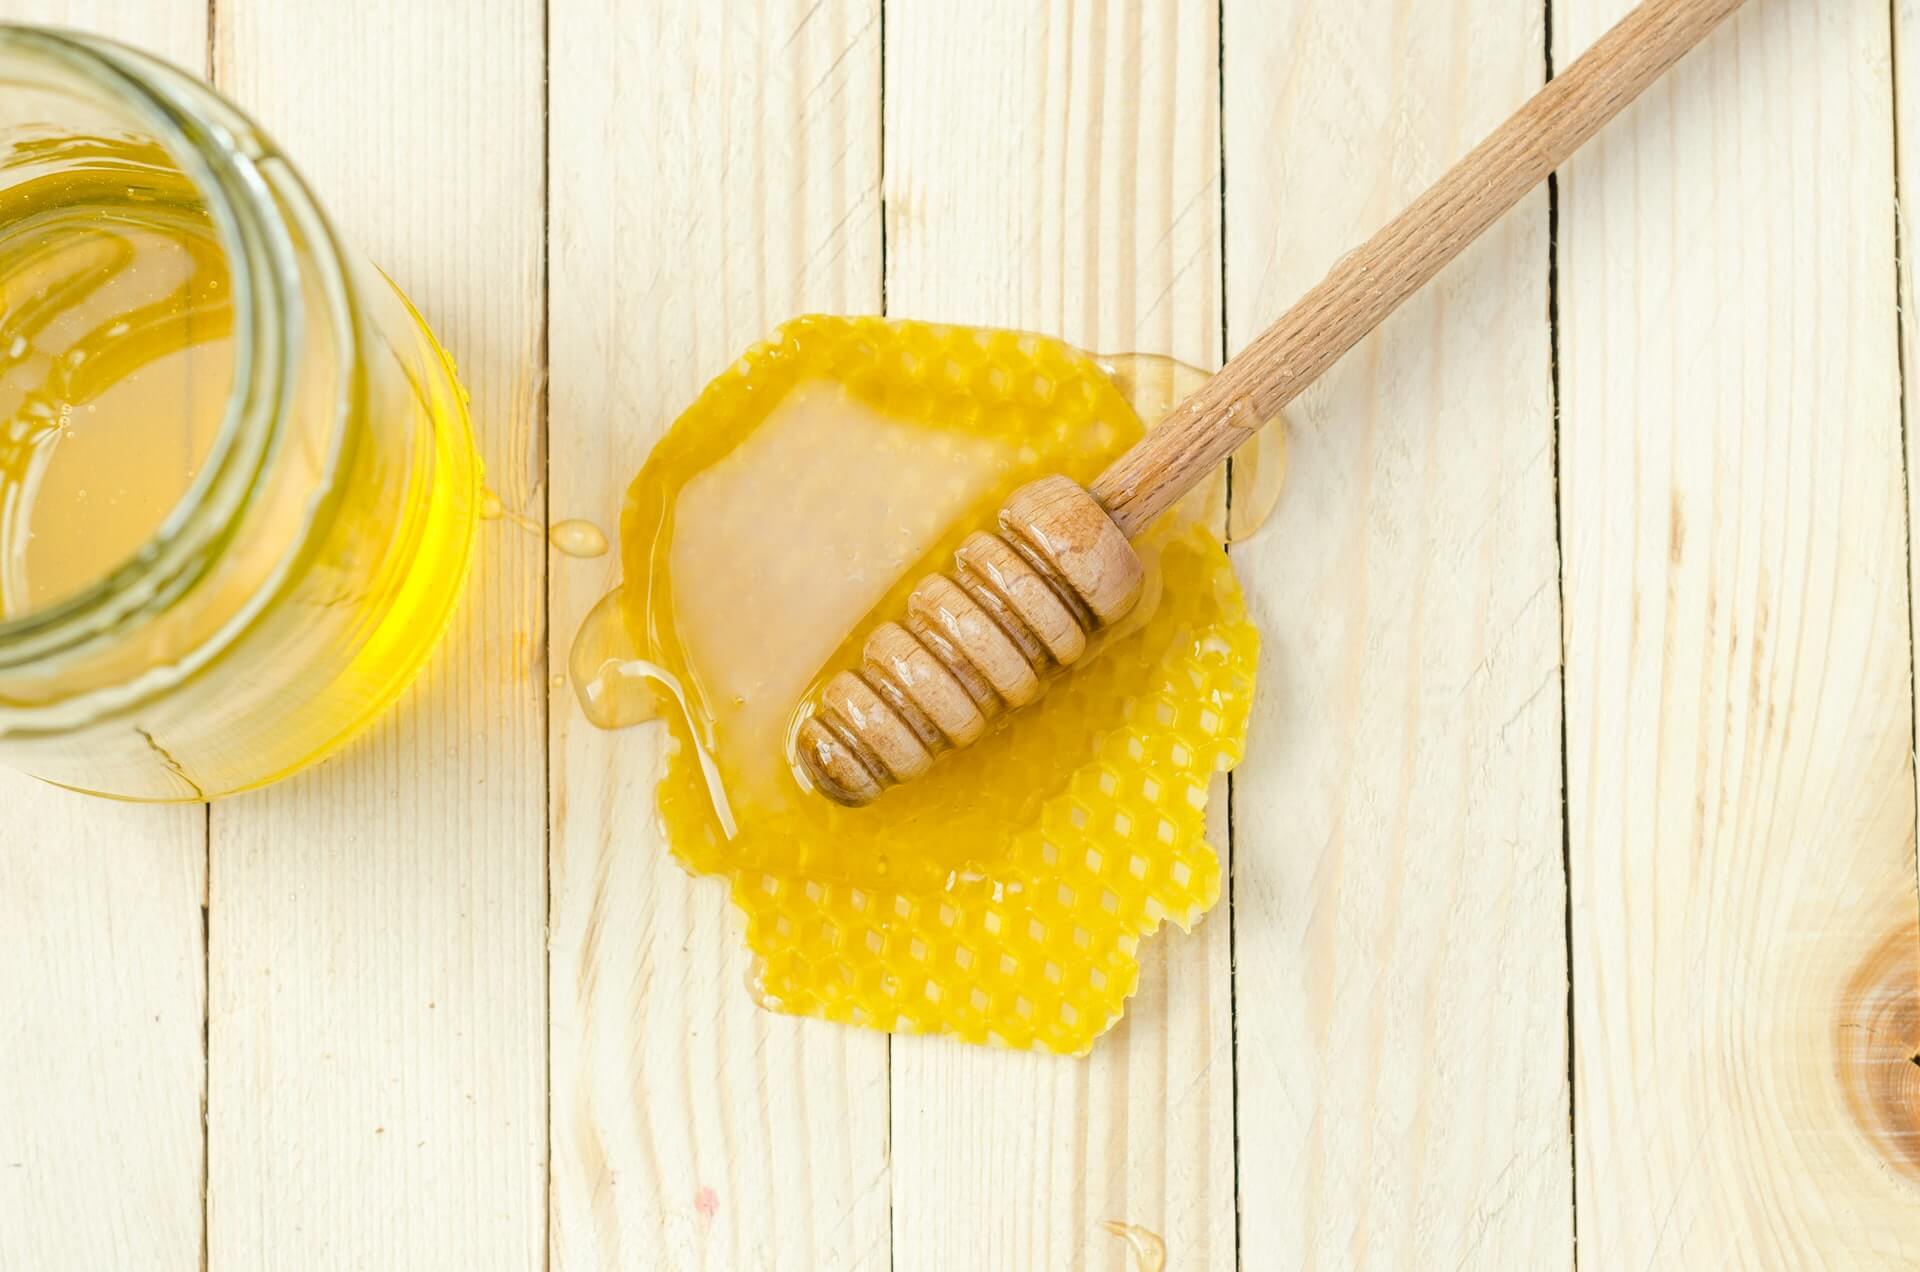 The case of Honey Adulteration in India